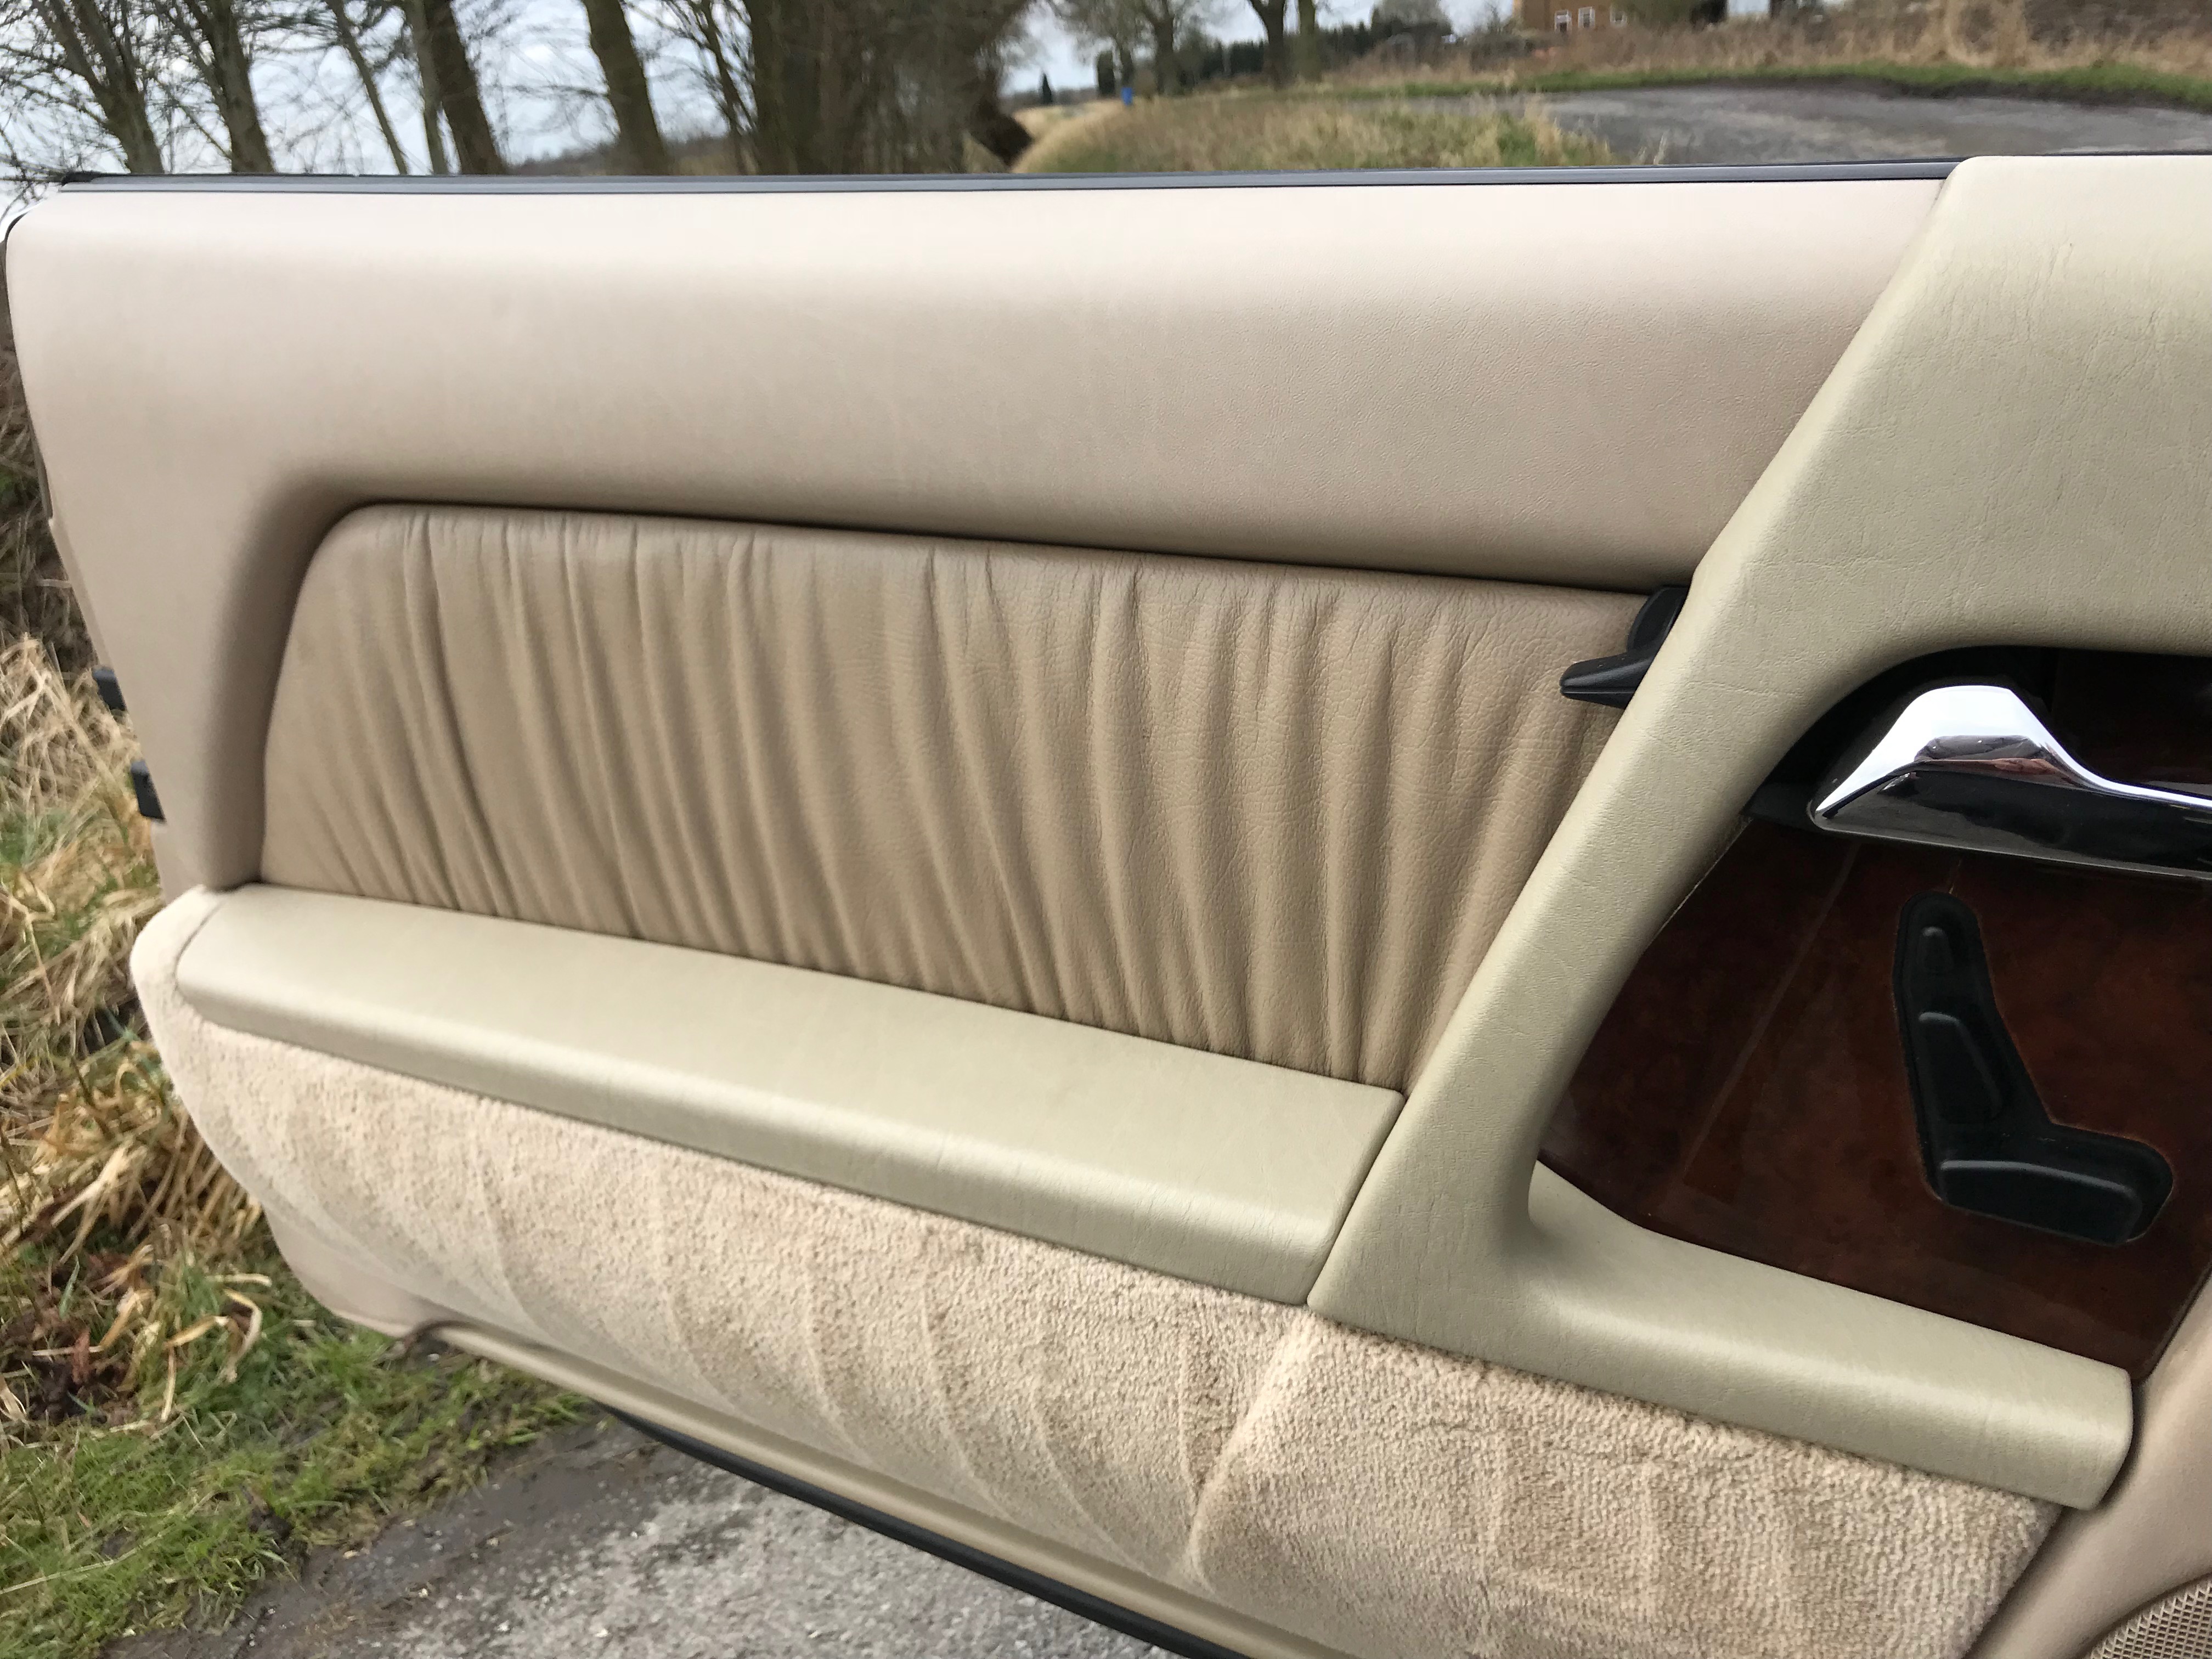 1994 Mercedes 280 SL Convertible Automatic - Image 17 of 49